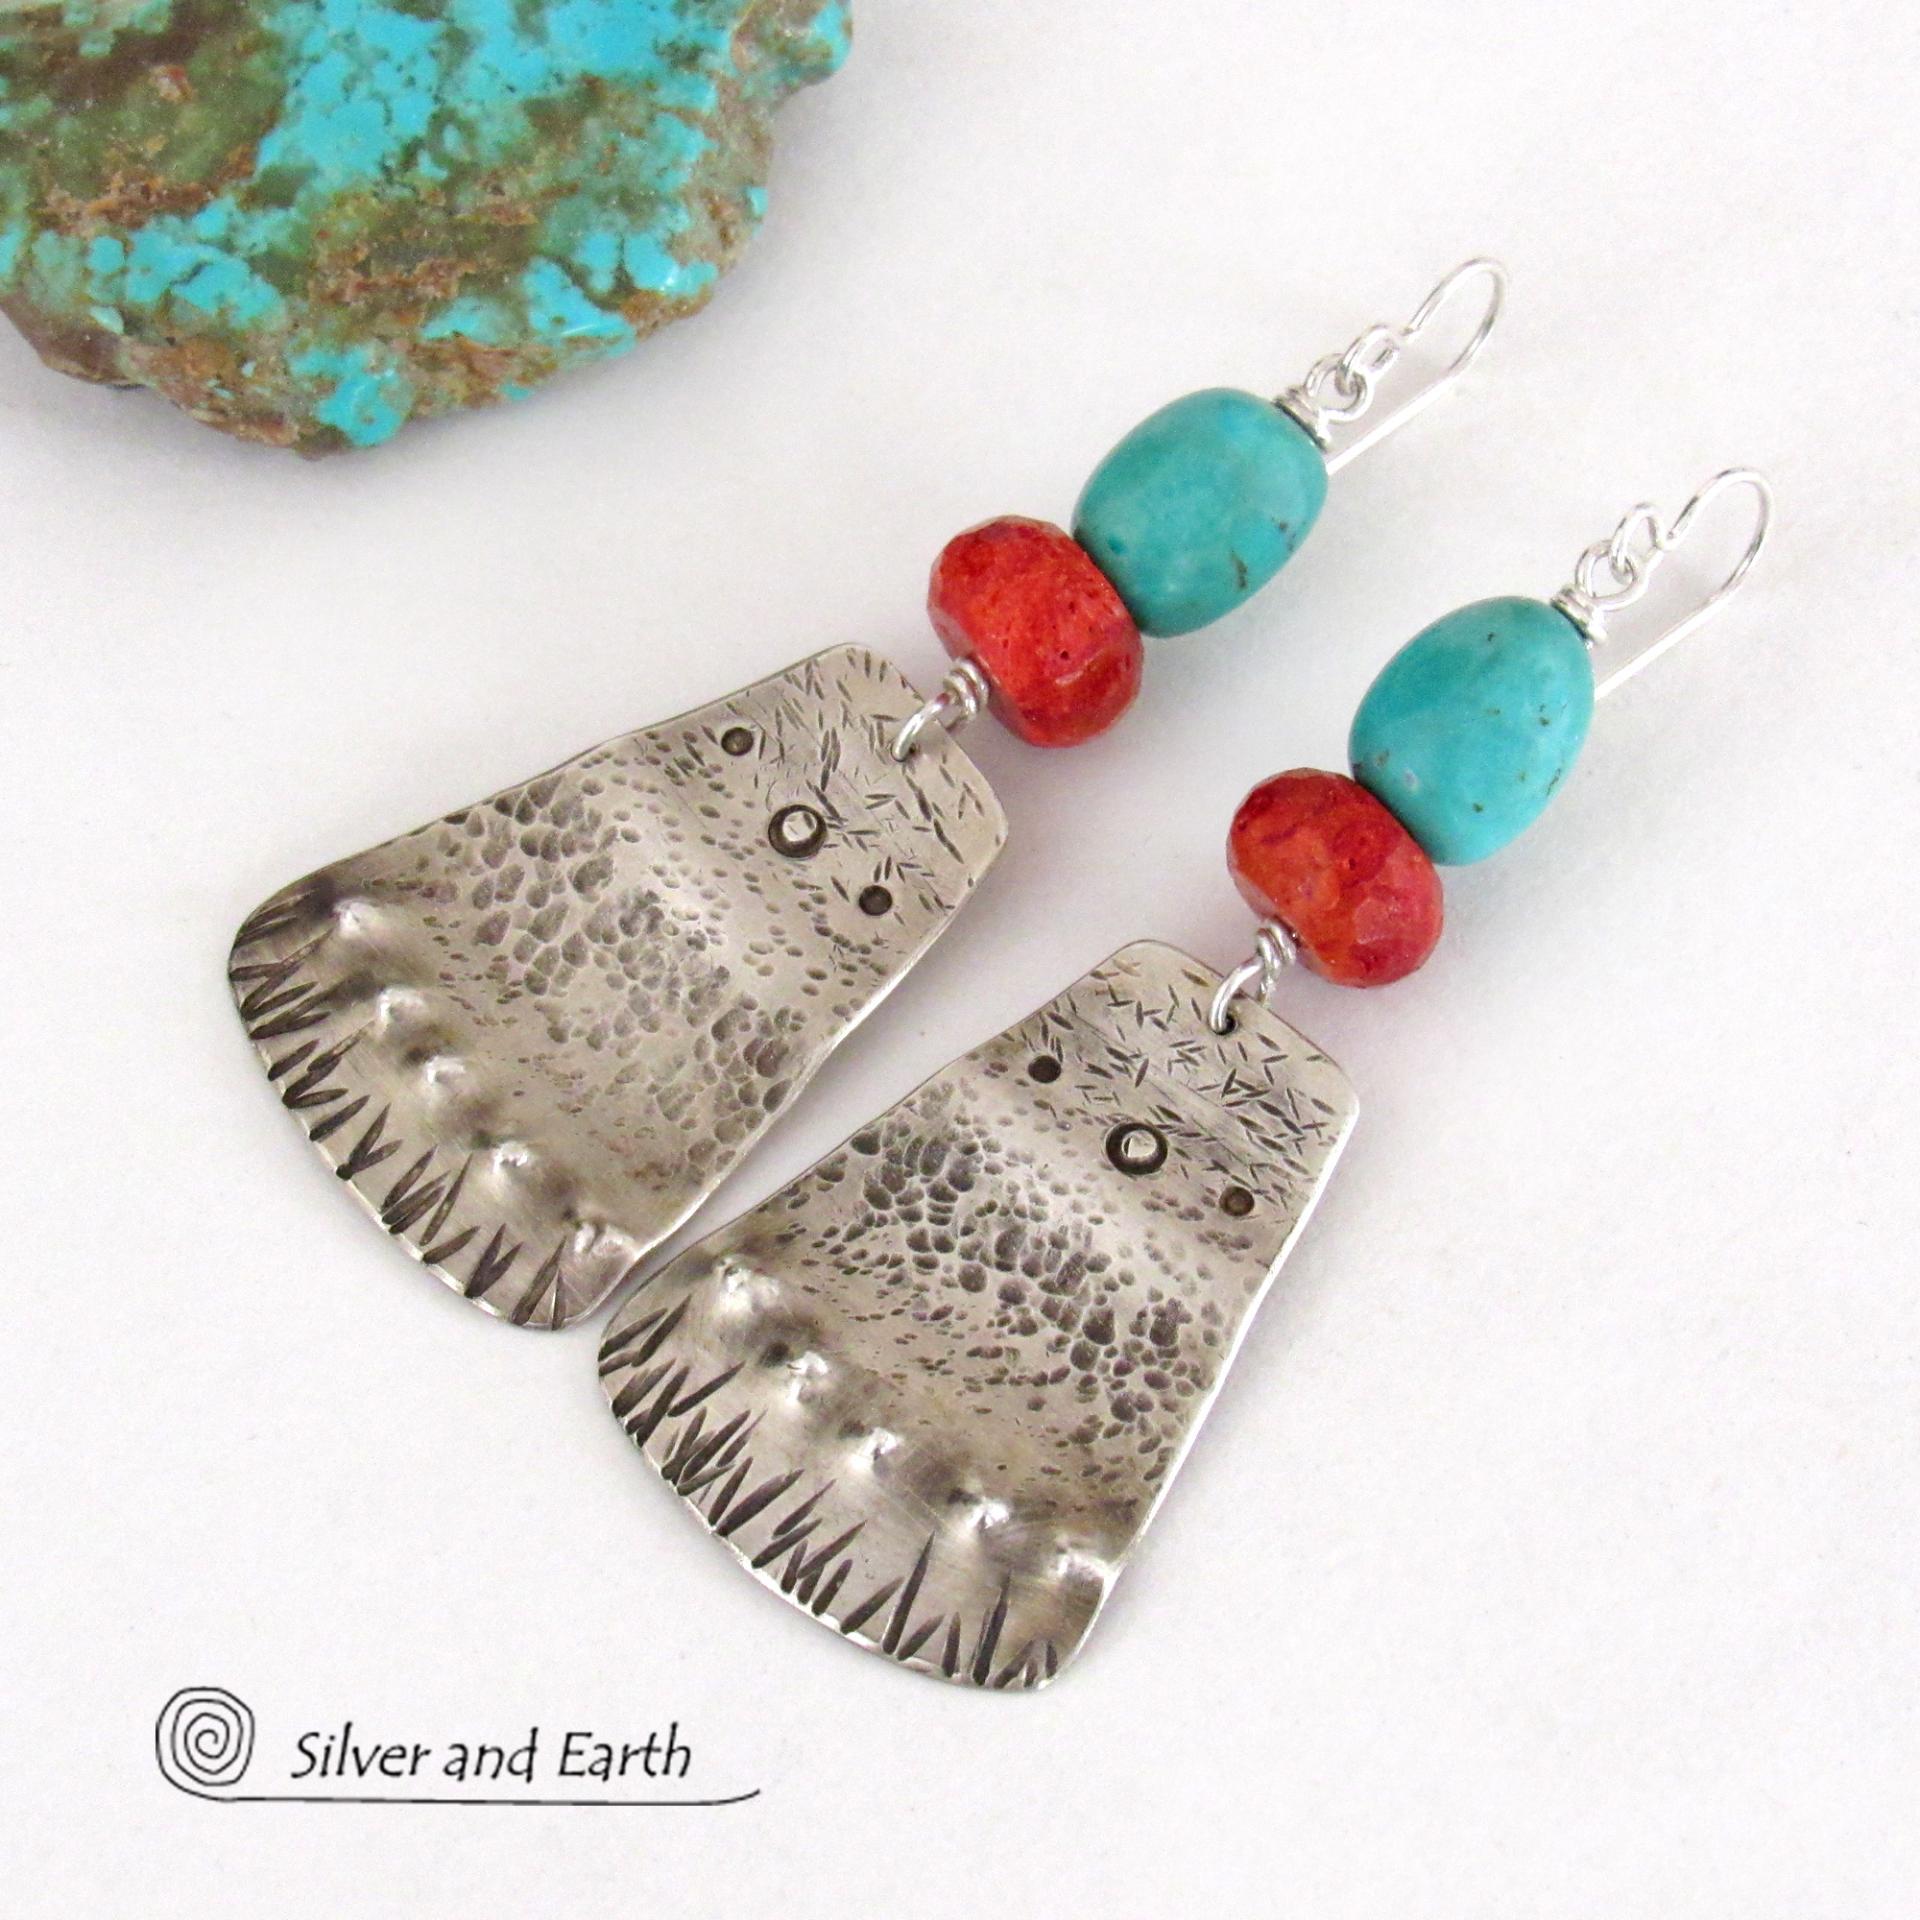 Sterling Silver and Turquoise Earrings with Red Coral - Artisan Handcrafted One of a Kind Southwest Style Jewelry